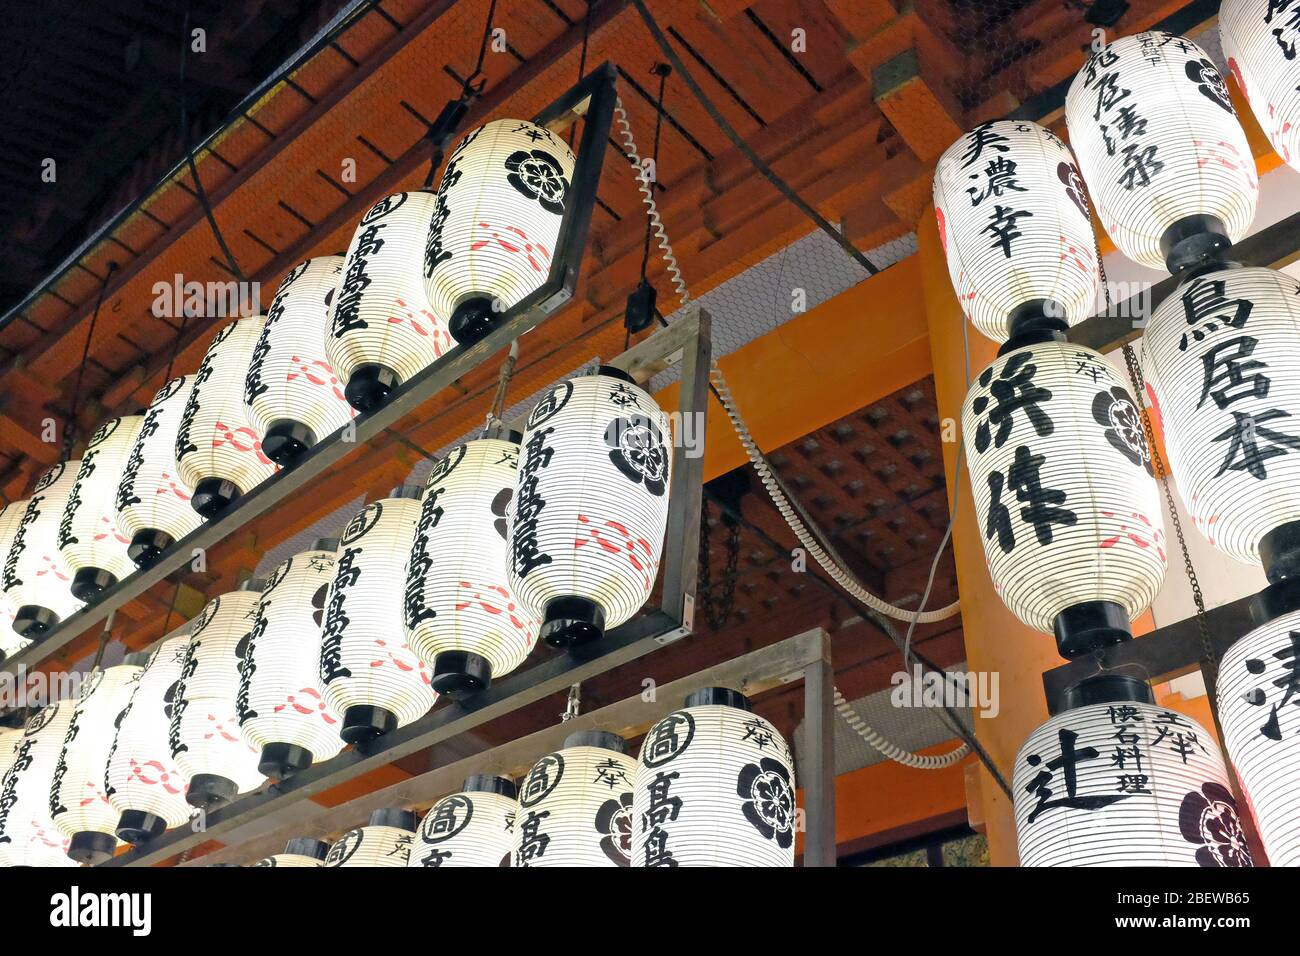 Rows of hanging Chocin, Japanese paper lanterns, are illuminated with chochinmoji on them in Kyoto, Japan on January 9, 2016. Stock Photo